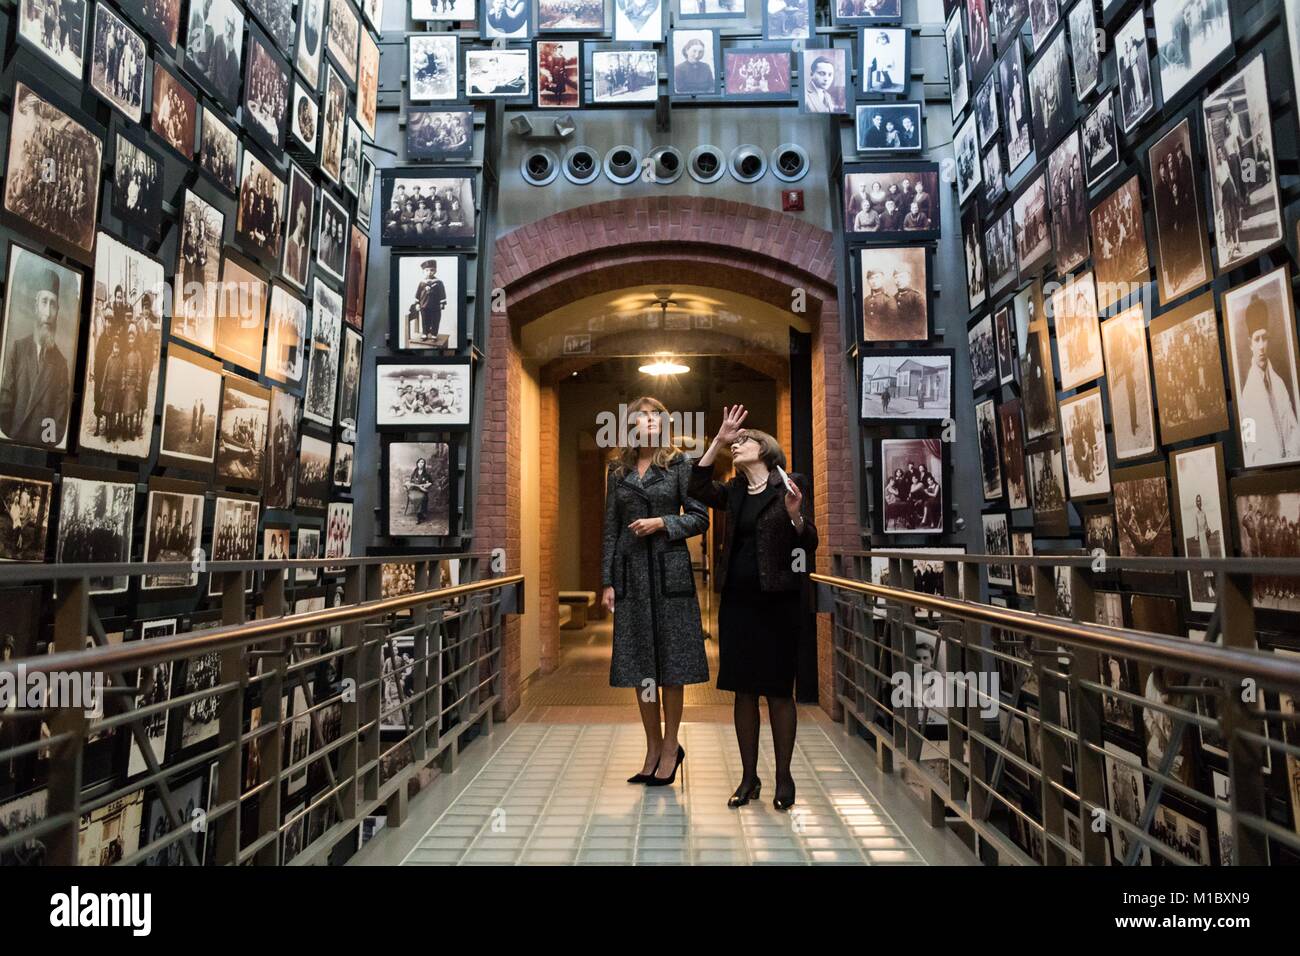 U.S First Lady Melania Trump, left, during a visit to the United States Holocaust Memorial Museum ahead of International Holocaust Remembrance Day January 25, 2018 in Washington, DC. Stock Photo